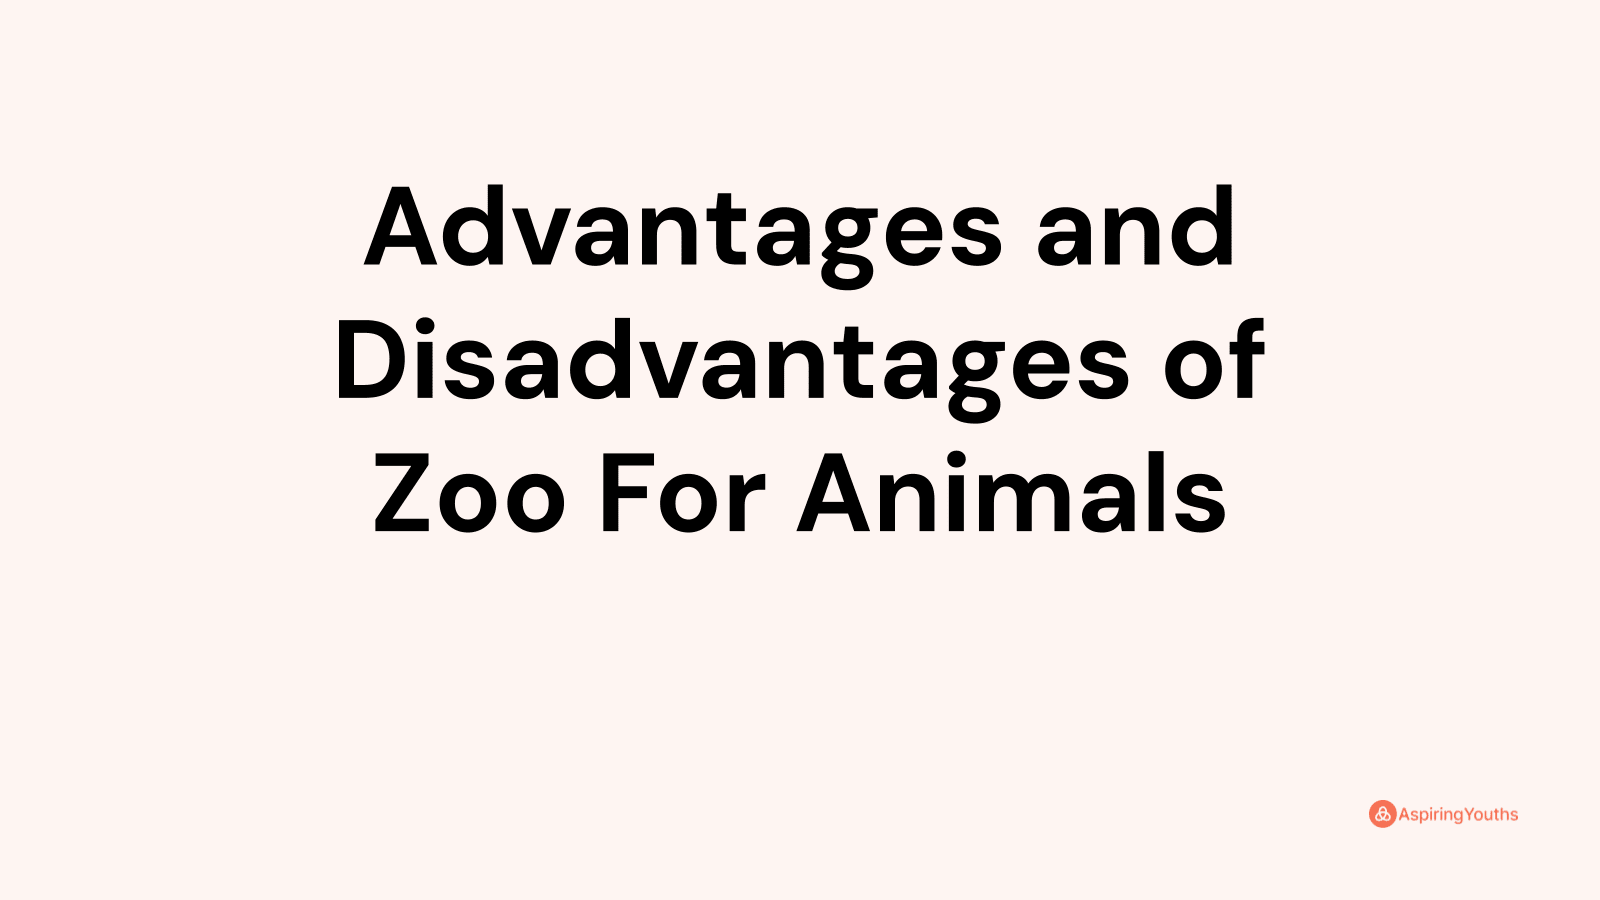 Advantages and disadvantages of Zoo For Animals